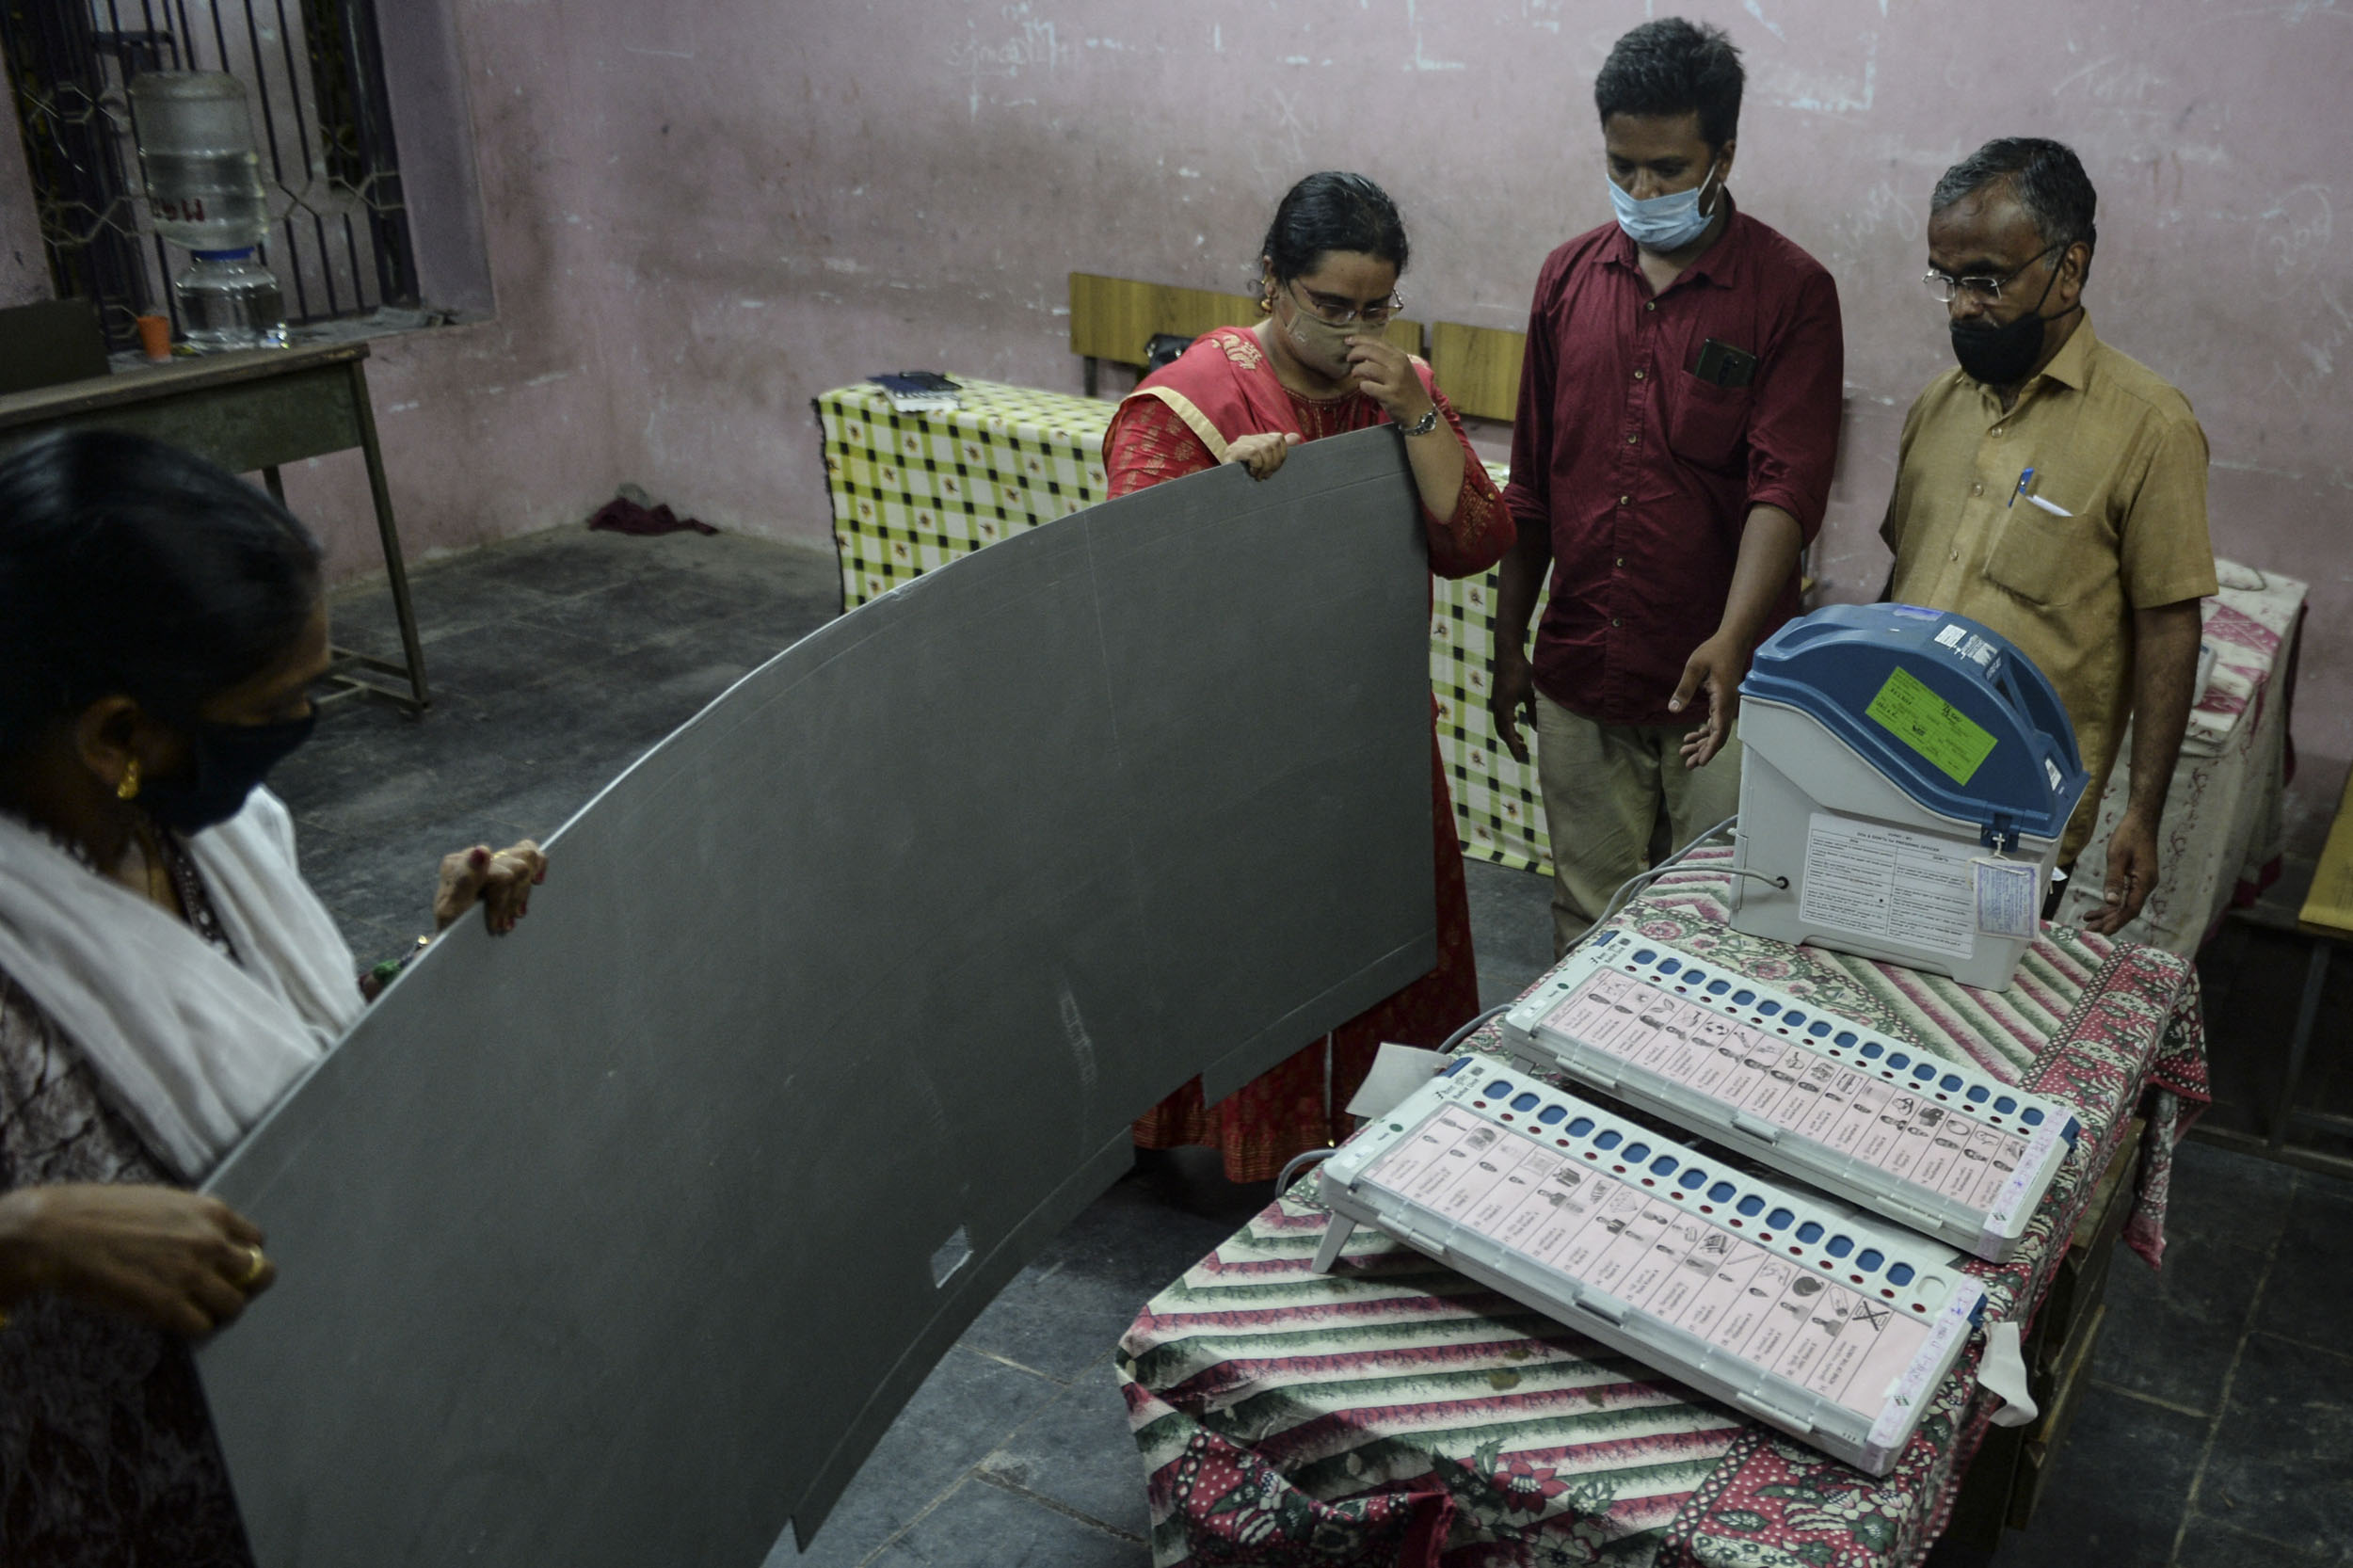 Election officials prepare polling stations on the eve of the Tamil Nadu state legislative assembly elections, in Chennai on April 5, 2021. (Photo by Arun SANKAR / AFP)